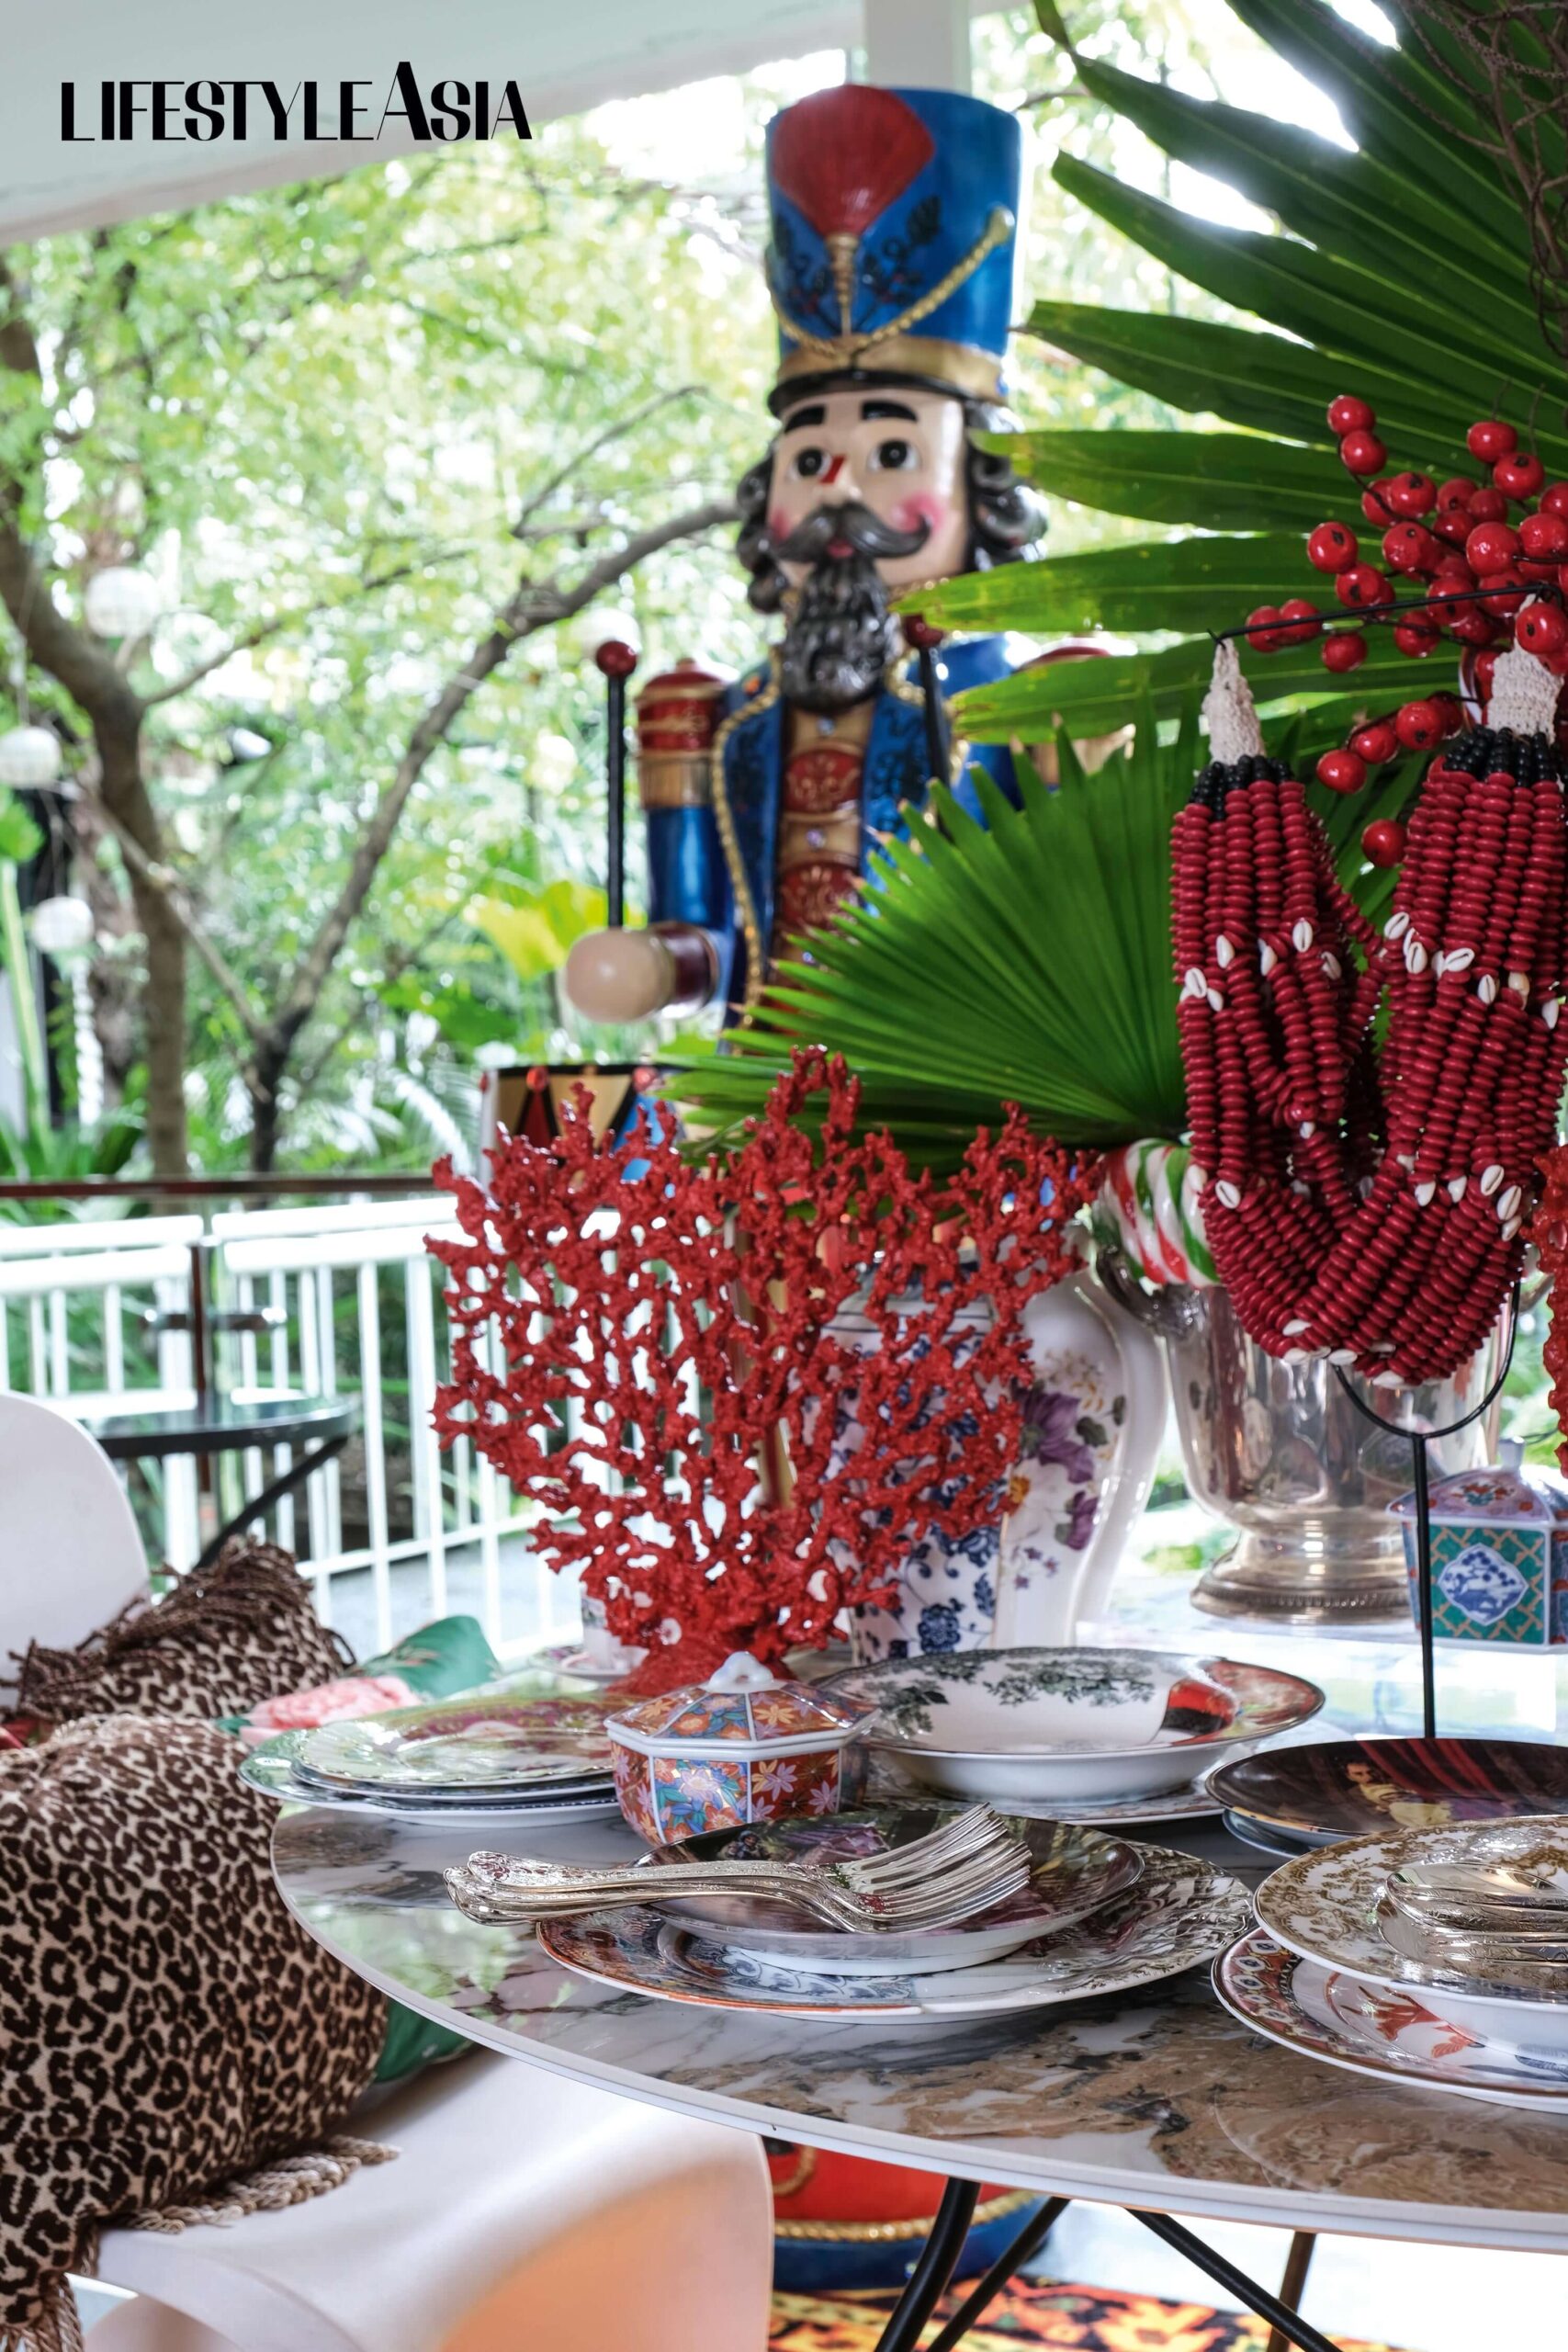 A life-size toy soldier watches over the table, set with different plates and other accessories and decor expertly layered by Chat.